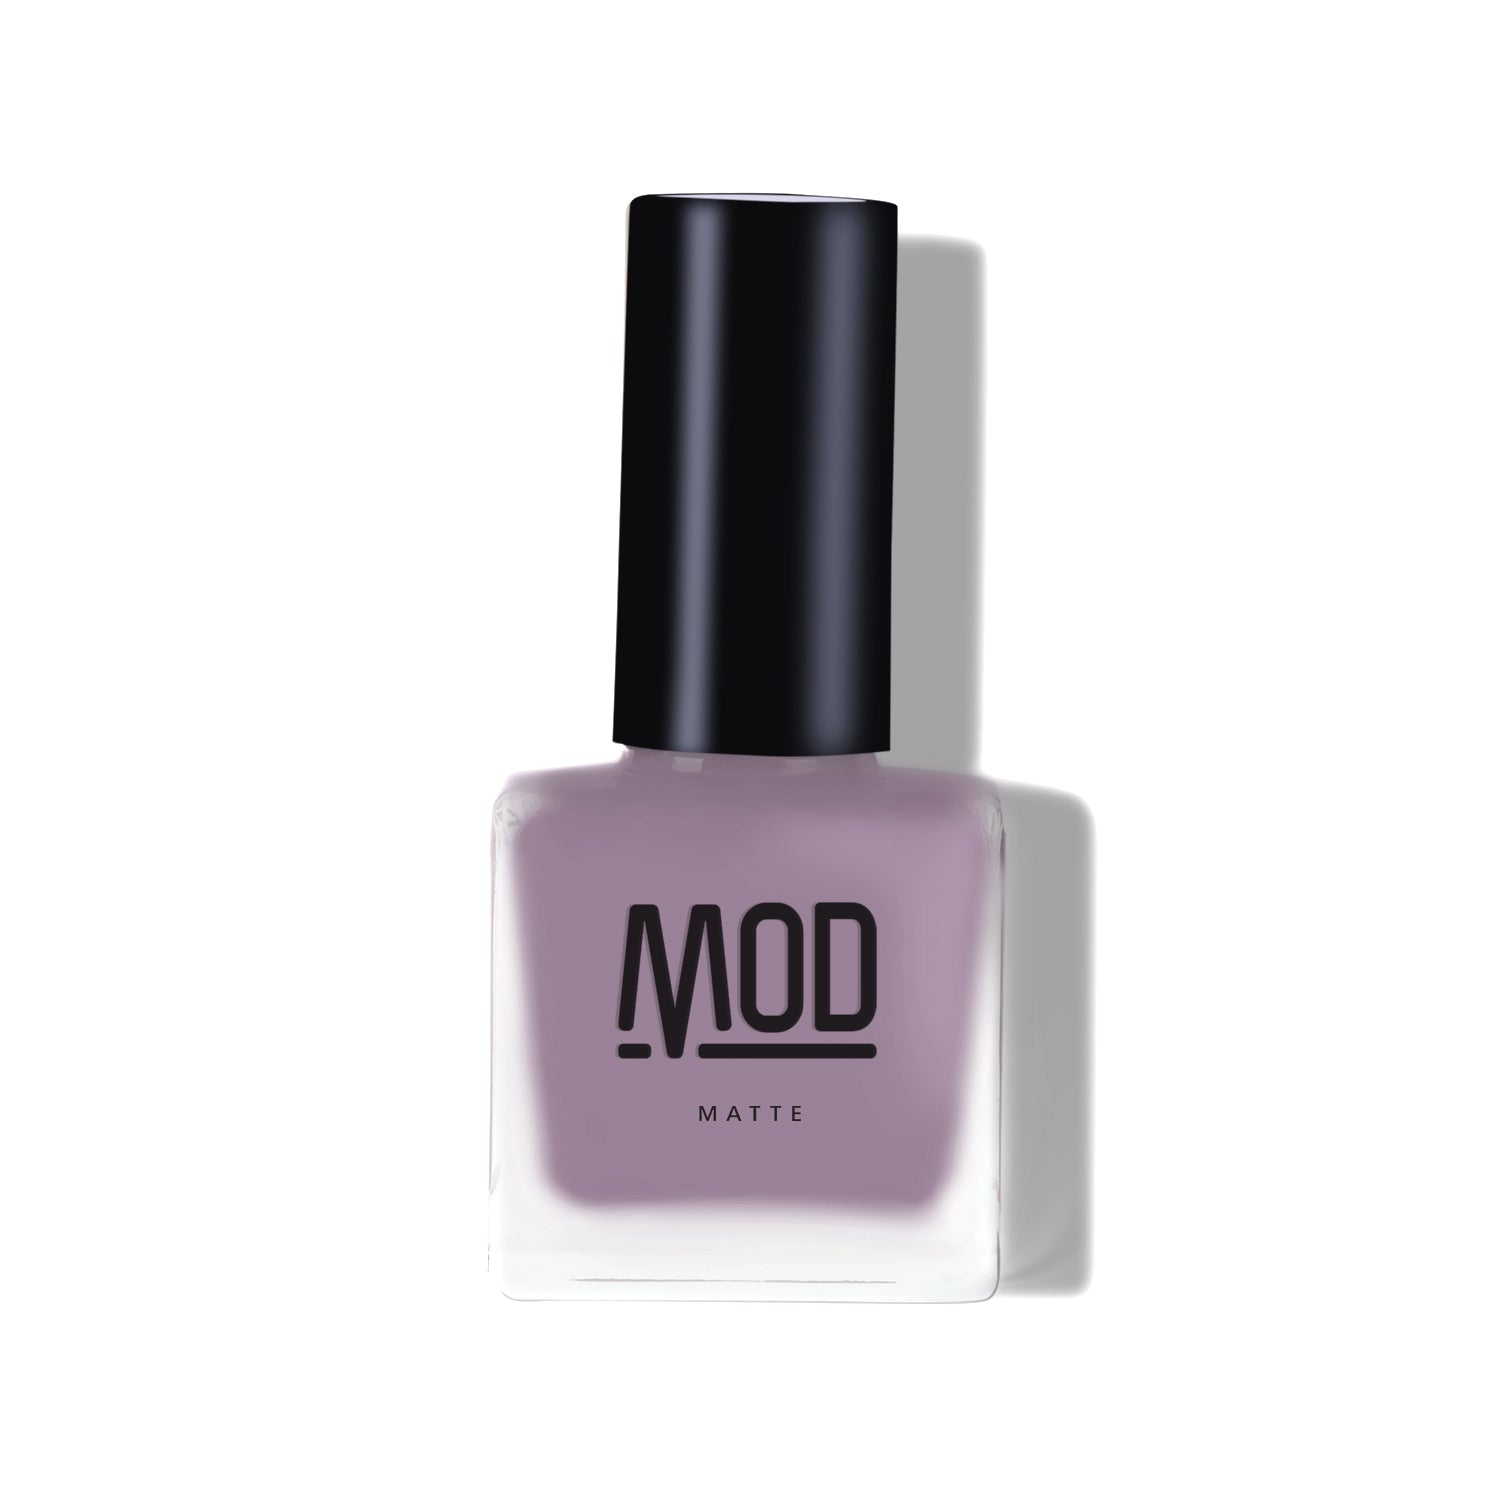 Lavender nails is proving to be *the* summer polish trend | Marie Claire UK